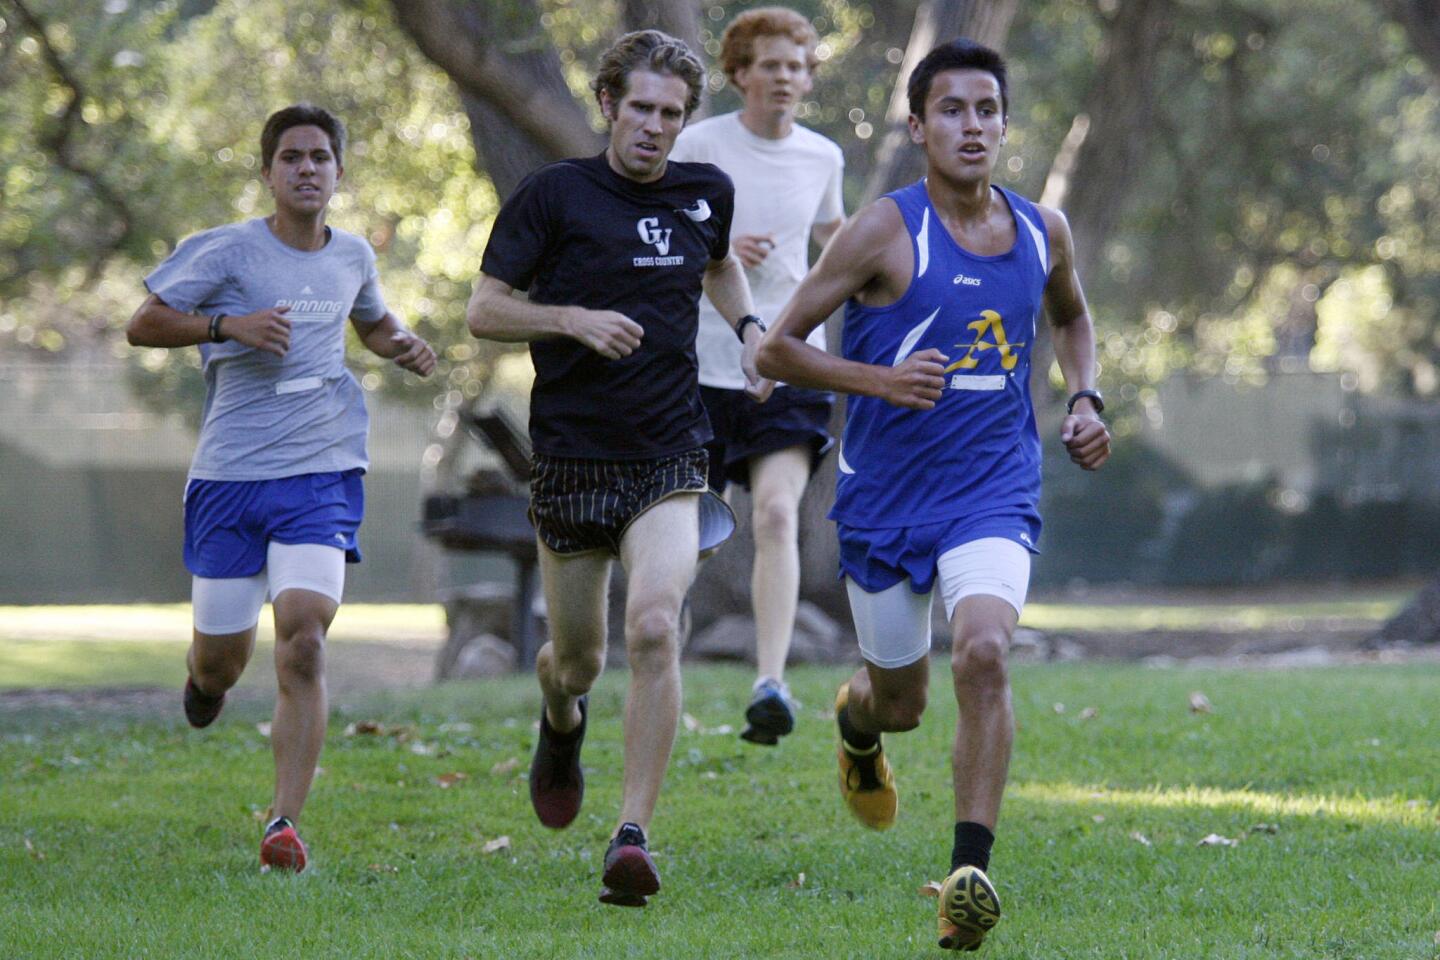 Cross country race series at Crescenta Valley Park